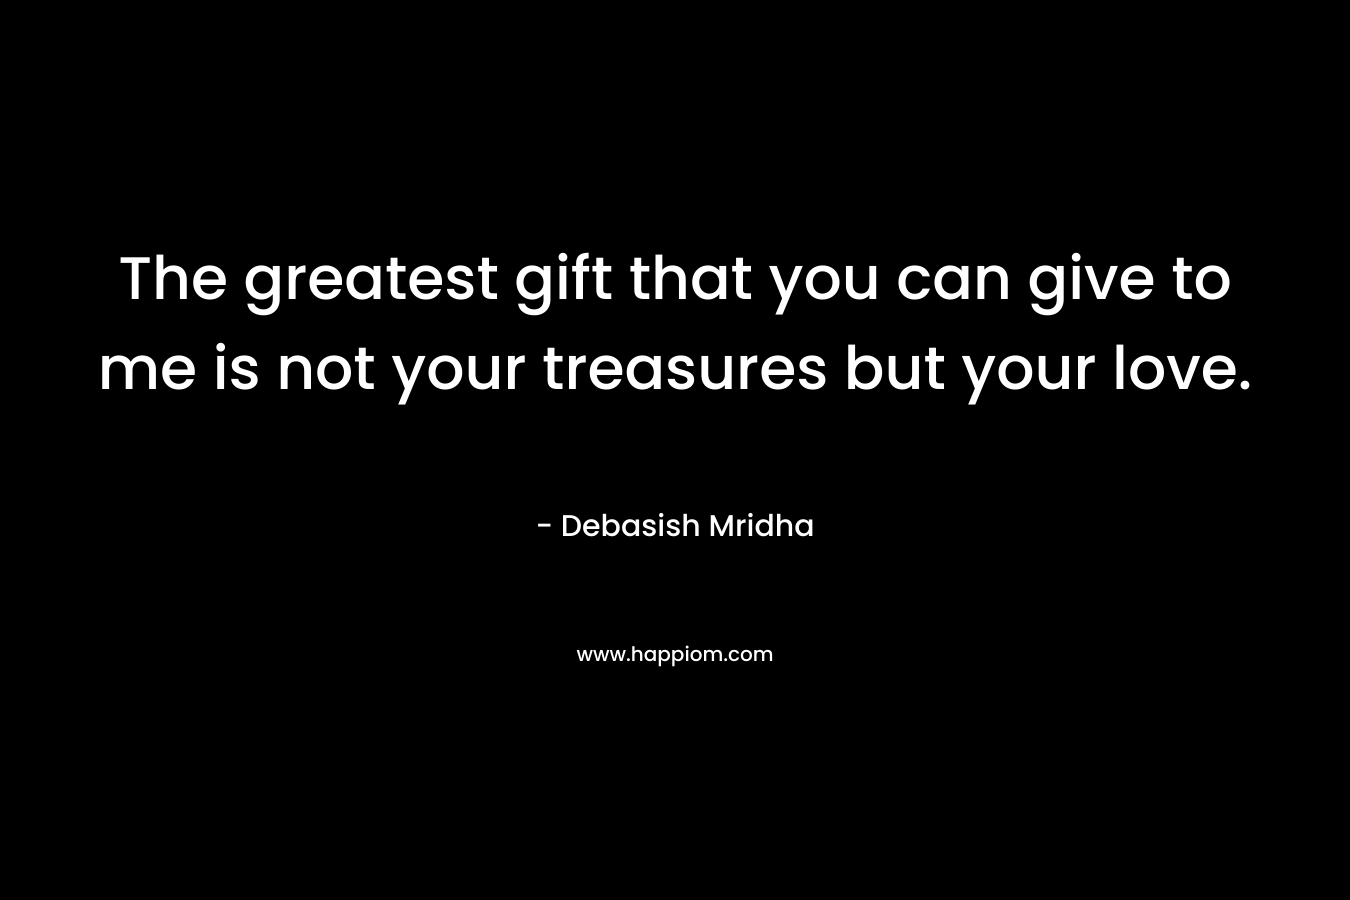 The greatest gift that you can give to me is not your treasures but your love. – Debasish Mridha